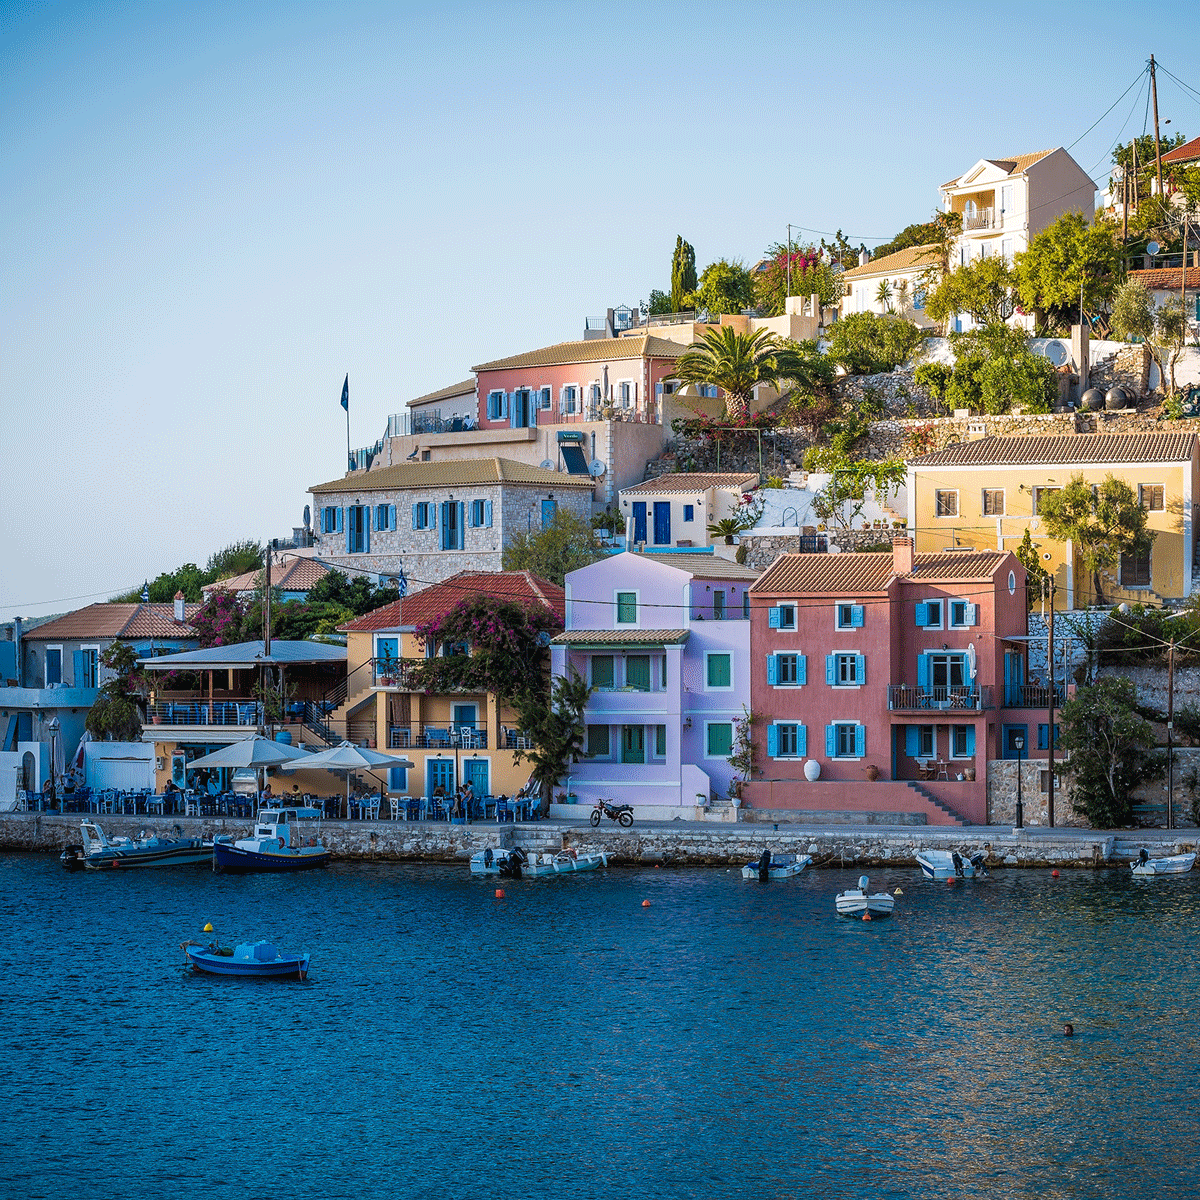 Colourful homes on the side of hill ocean side in Greece.